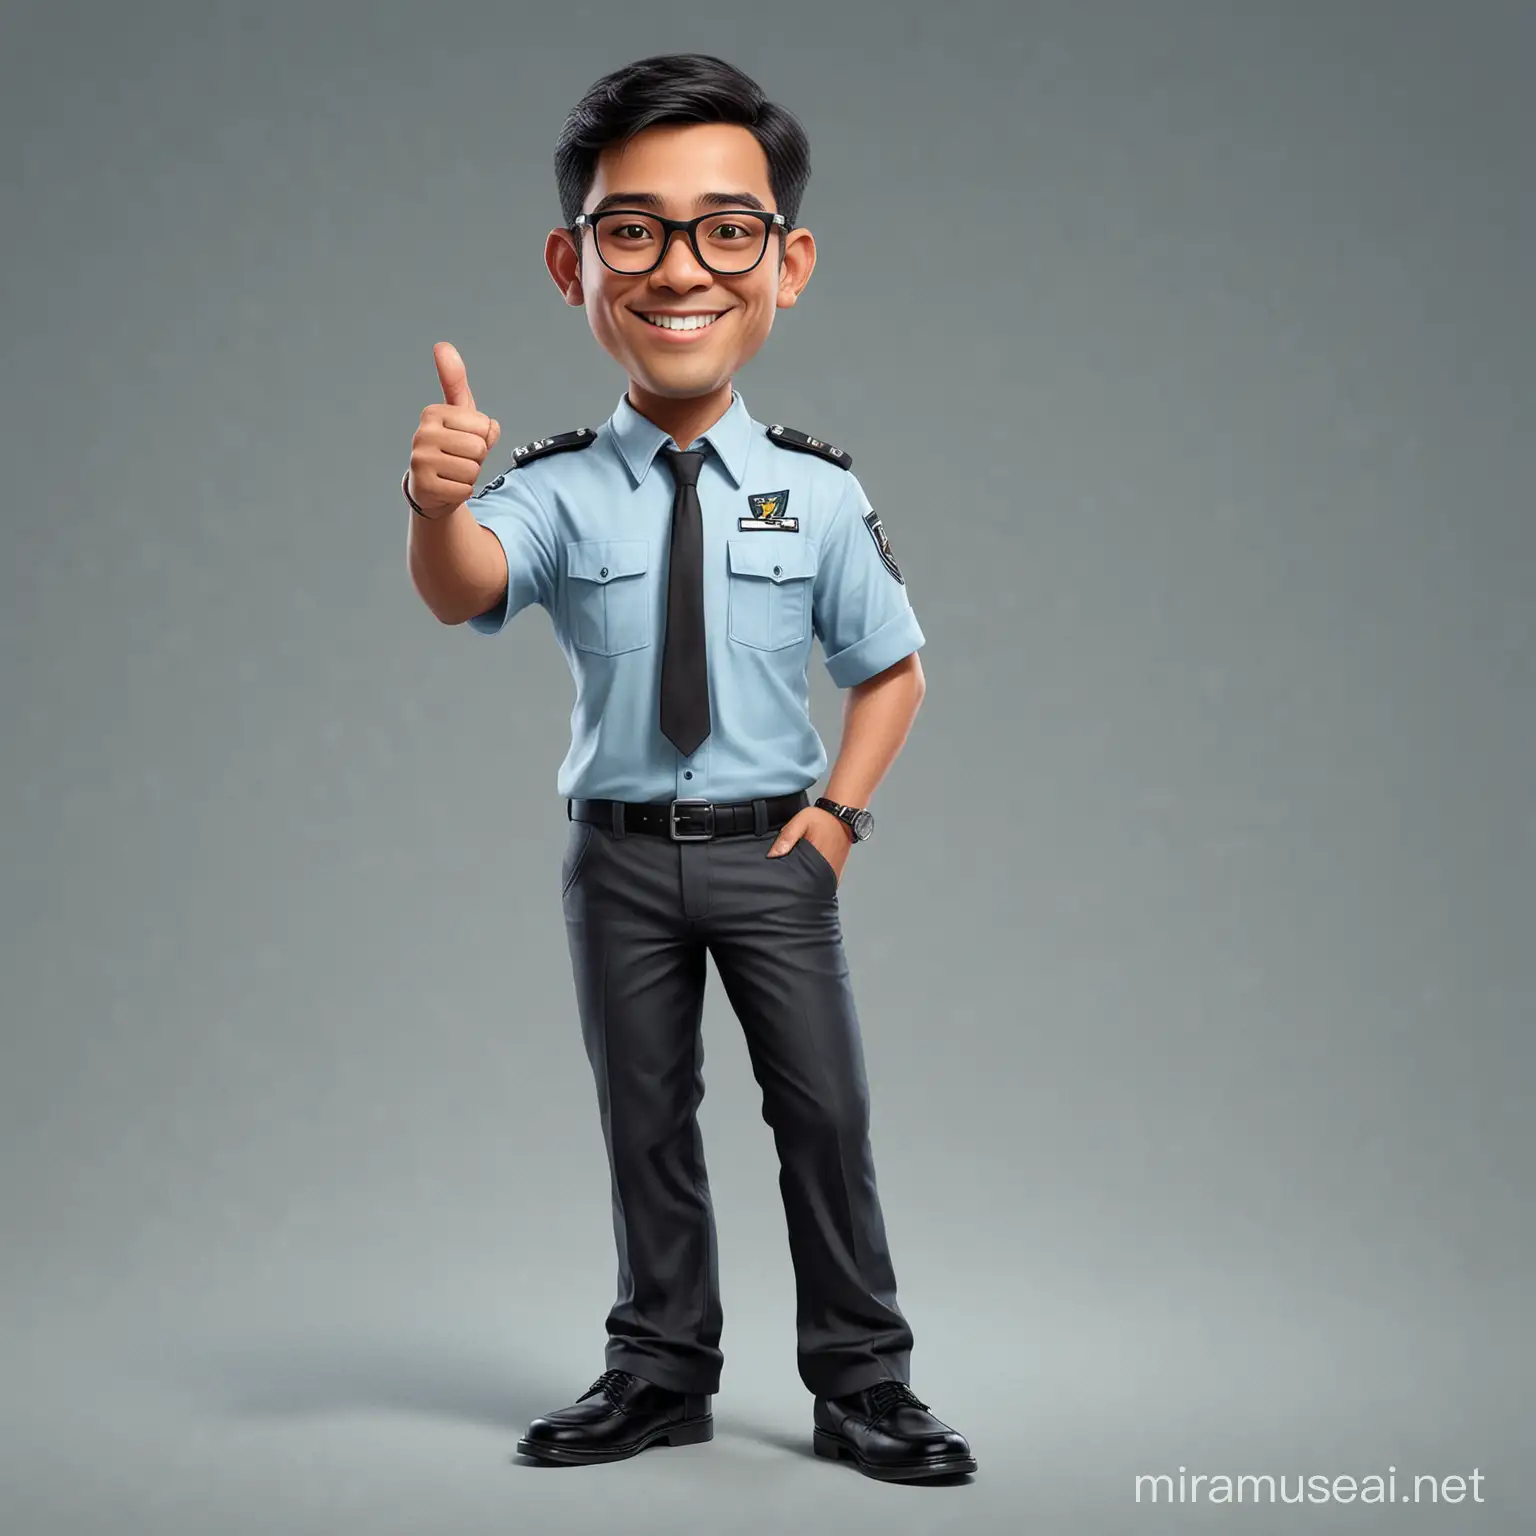 caricature potrait full body, A 29 year old Indonesian man, Neat short hair, wearing glasses, Wearing a short-sleeved light blue pilot uniform , black tie, black trousers, loafers, front view smiling photo, Hand pose giving a thumbs up, realistic.